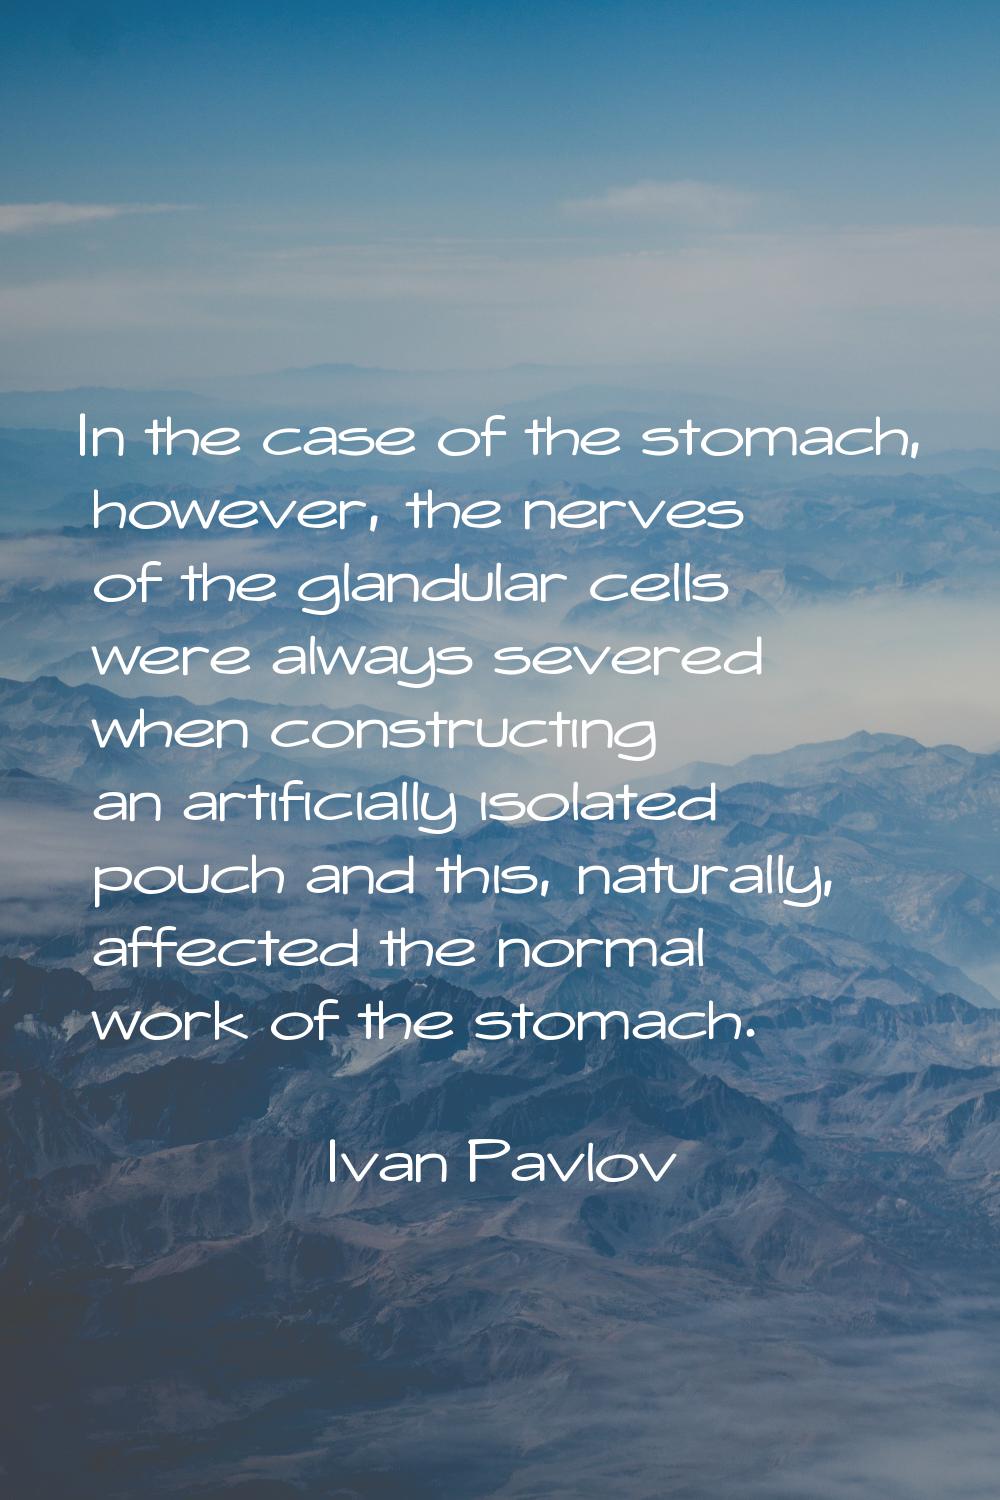 In the case of the stomach, however, the nerves of the glandular cells were always severed when con